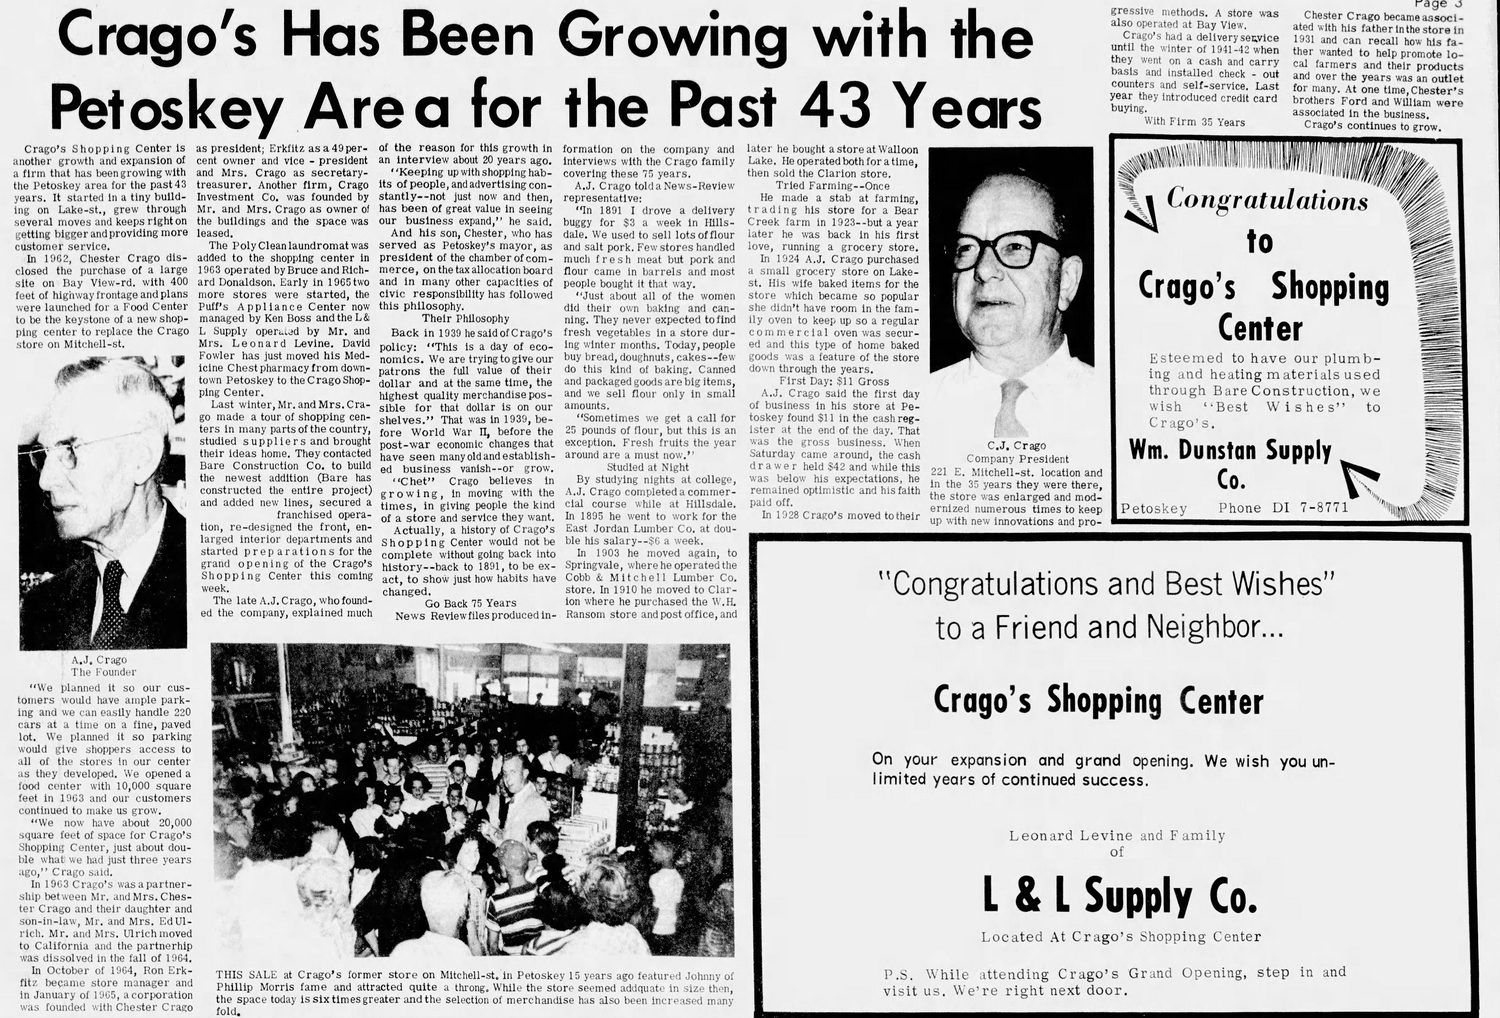 Cragos Shopping Center - July 1966 Article (newer photo)